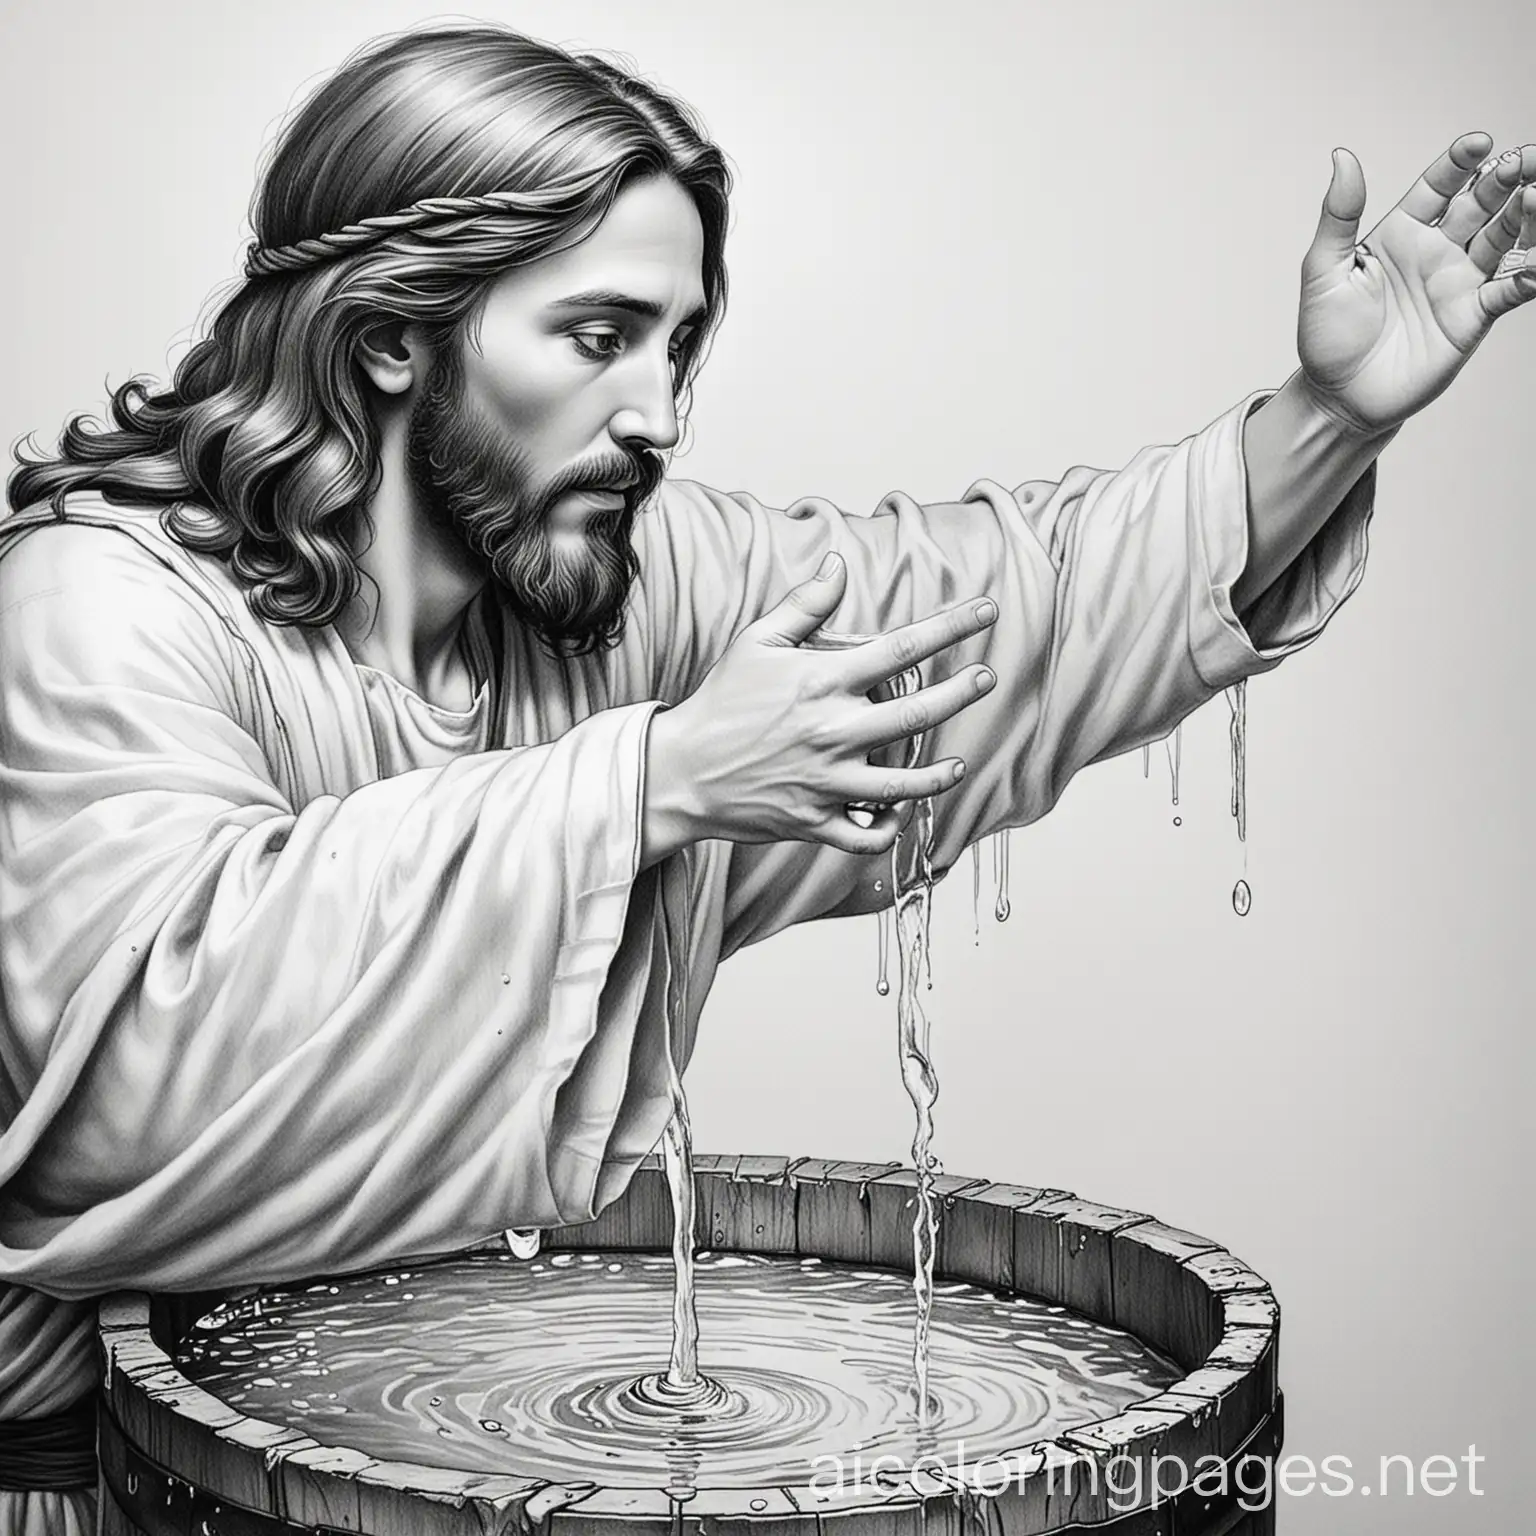 an image of Jesus of the bible dipping a glass into a barrel of water with properly drawn hands with 4 fingers and a thumb on each hand, black and white coloring book page, Coloring Page, black and white, line art, white background, Simplicity, Ample White Space. The background of the coloring page is plain white to make it easy for young children to color within the lines. The outlines of all the subjects are easy to distinguish, making it simple for kids to color without too much difficulty